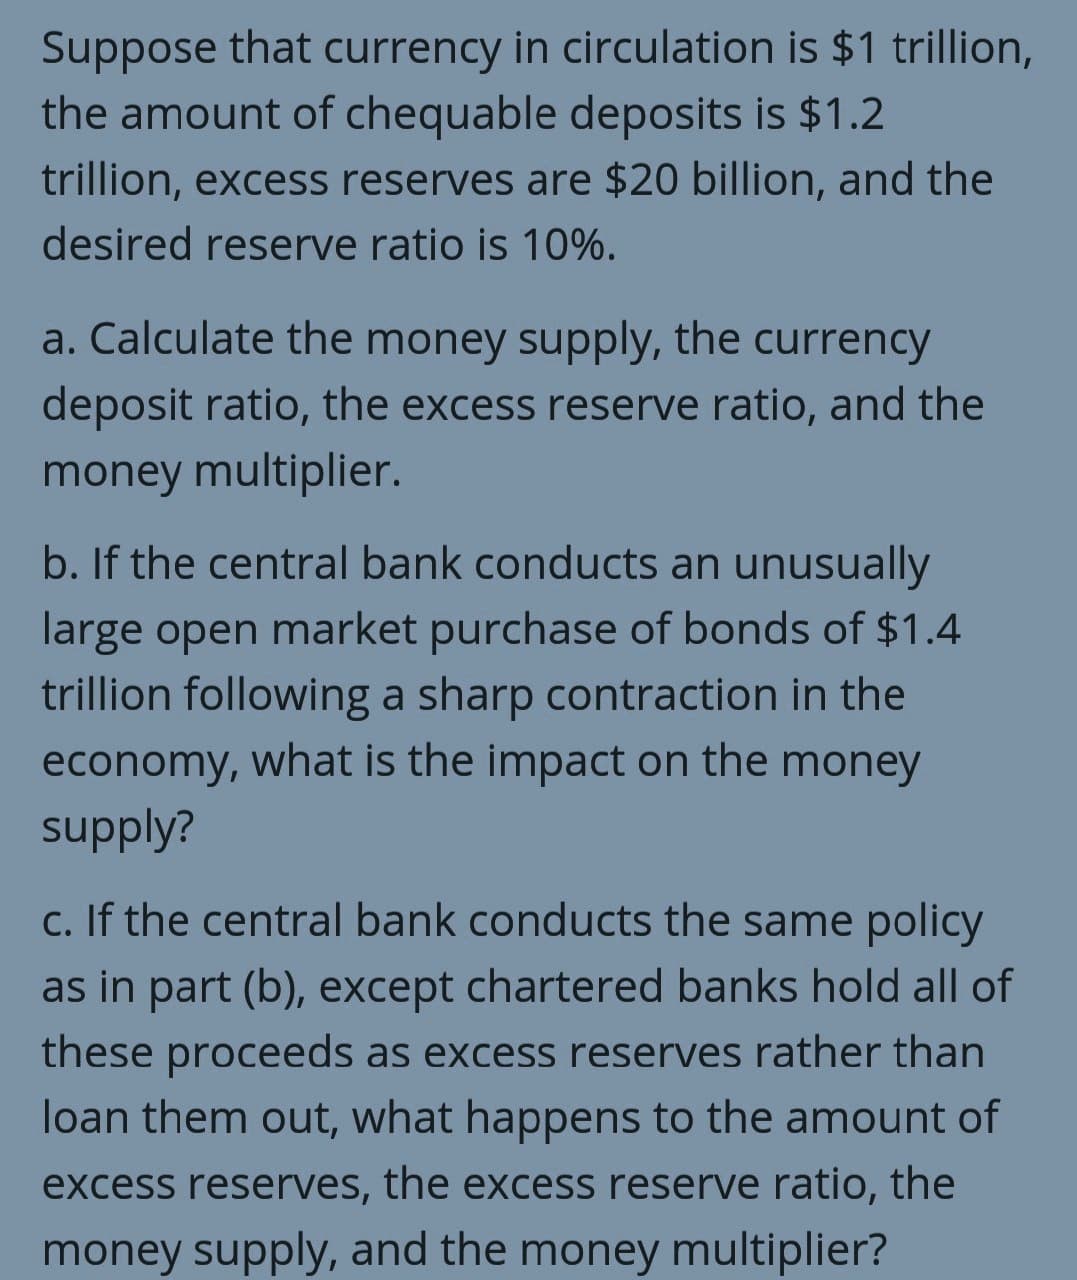 Suppose that currency in circulation is $1 trillion,
the amount of chequable deposits is $1.2
trillion, excess reserves are $20 billion, and the
desired reserve ratio is 10%.
a. Calculate the money supply, the currency
deposit ratio, the excess reserve ratio, and the
money multiplier.
b. If the central bank conducts an unusually
large open market purchase of bonds of $1.4
trillion following a sharp contraction in the
economy, what is the impact on the money
supply?
c. If the central bank conducts the same policy
as in part (b), except chartered banks hold all of
these proceeds as excess reserves rather than
loan them out, what happens to the amount of
excess reserves, the excess reserve ratio, the
money supply, and the money multiplier?